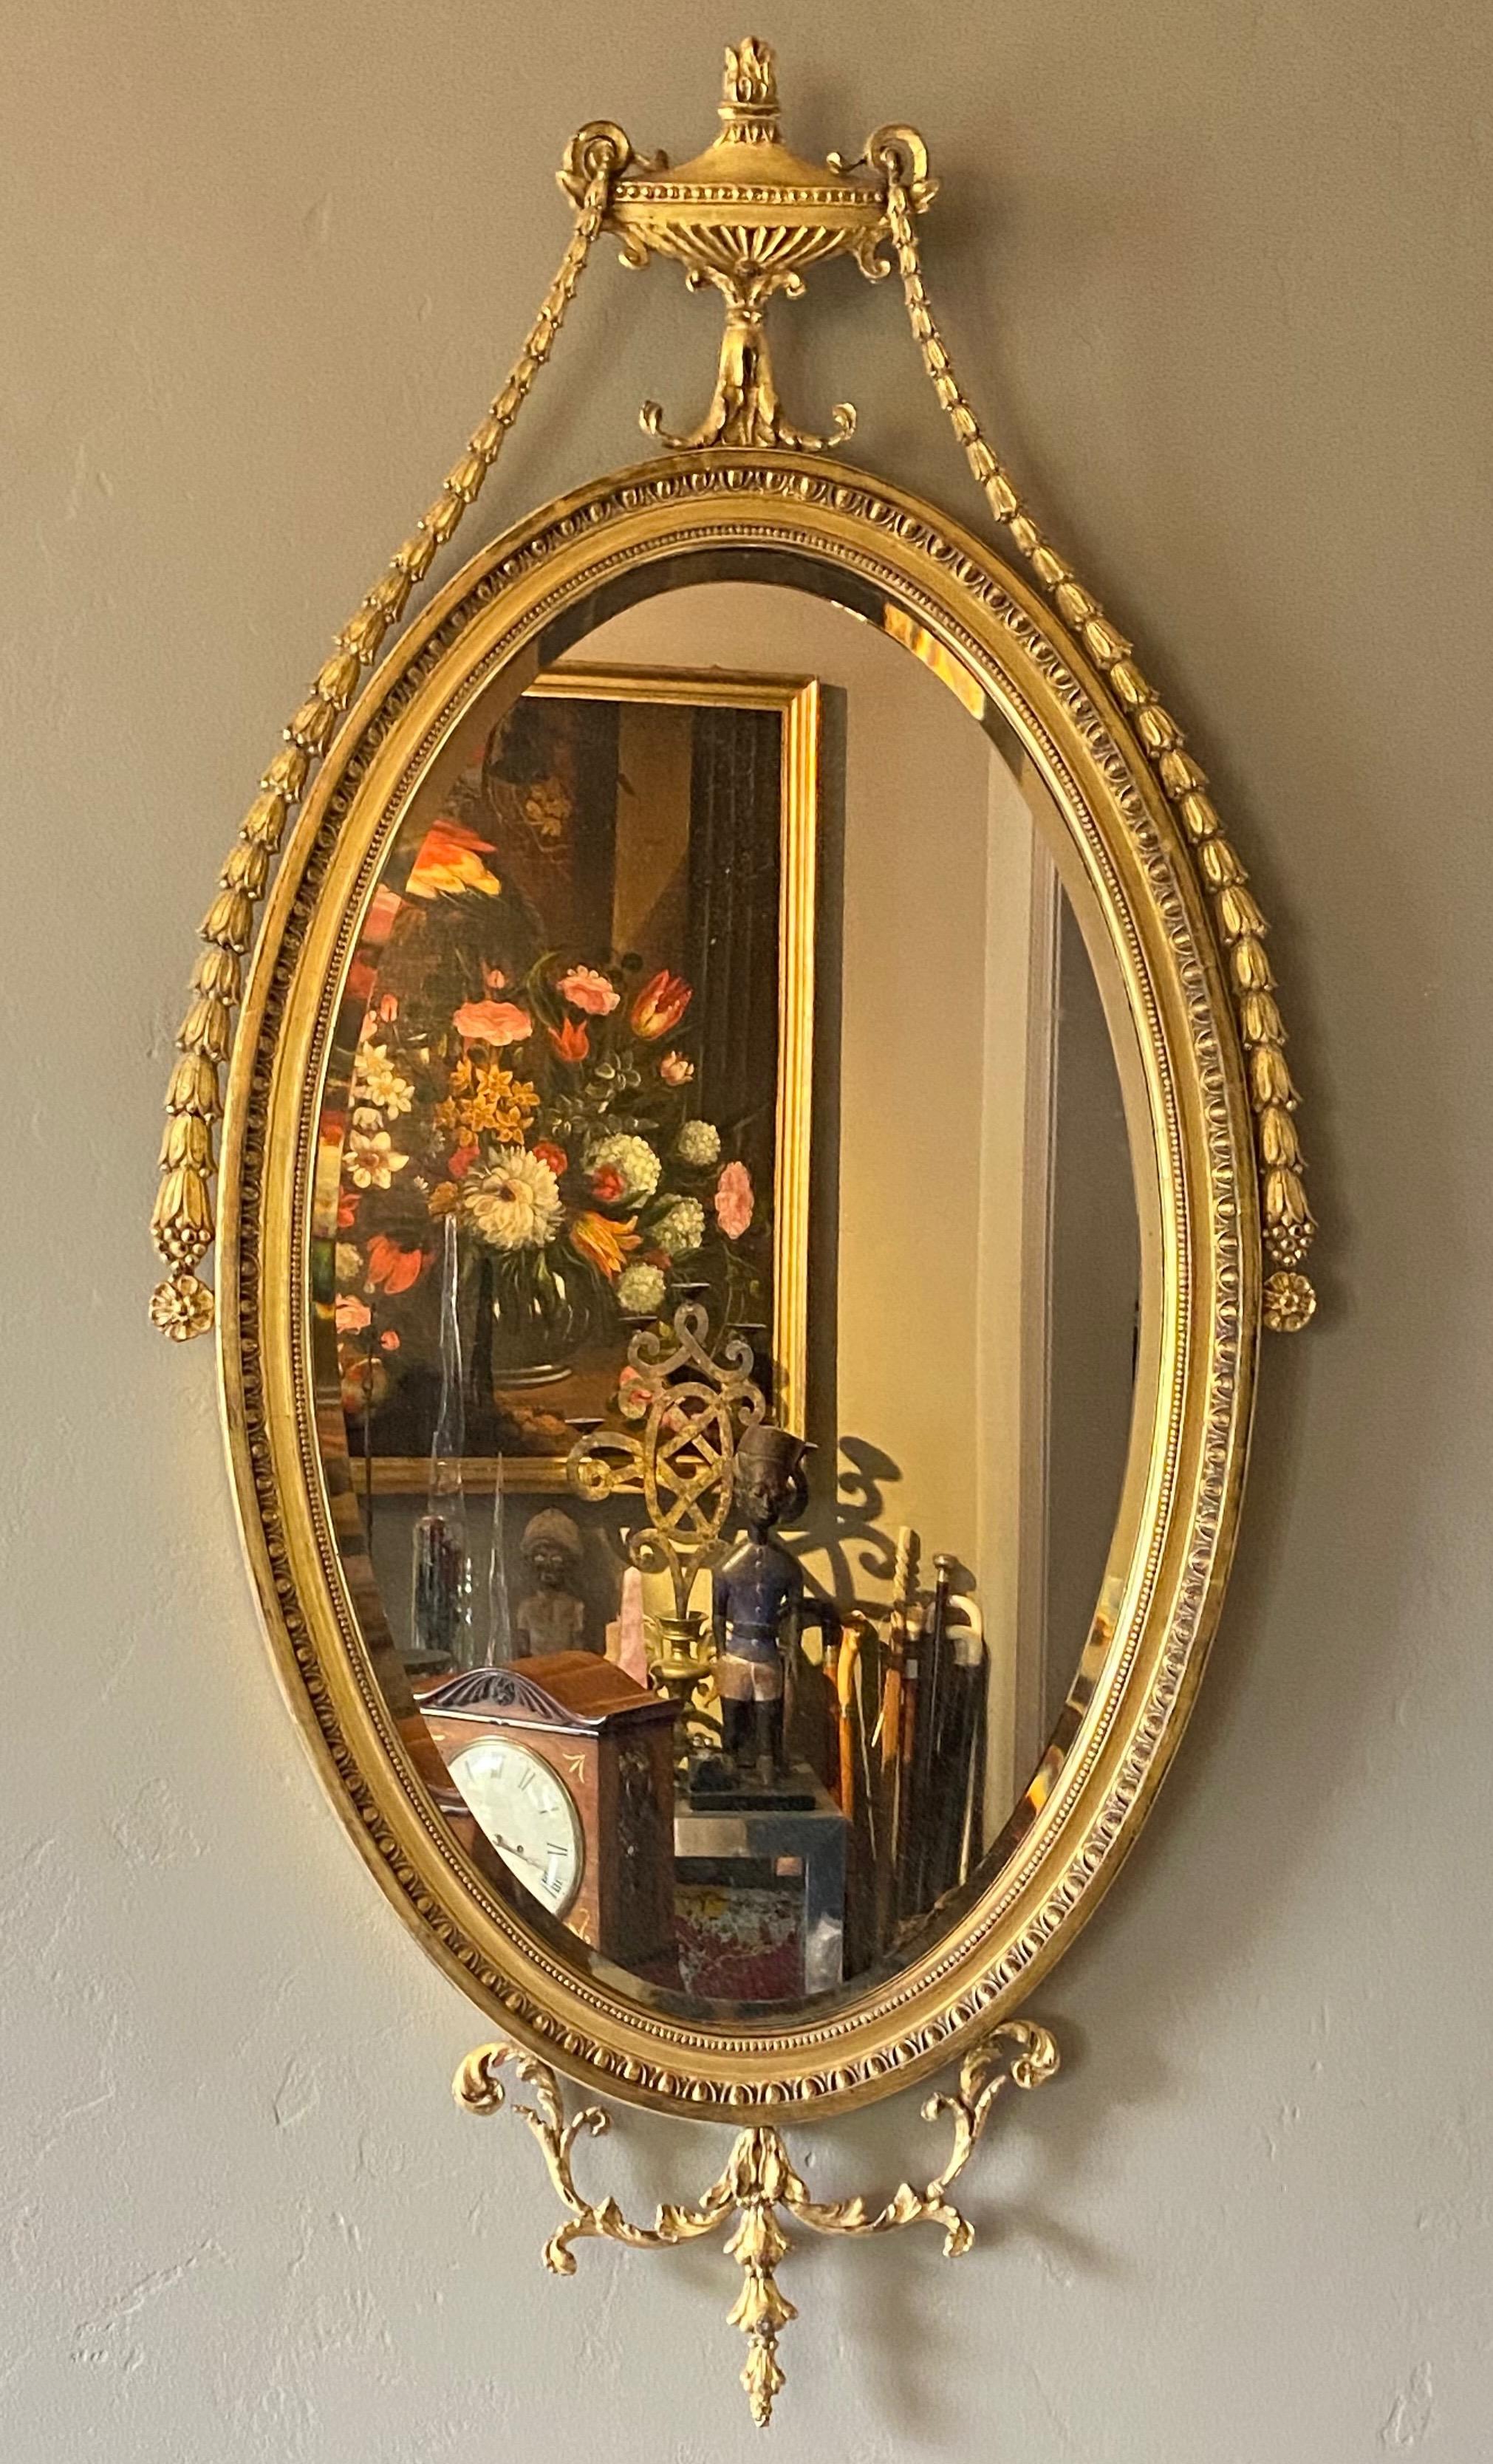 English Adam style gilt wood wall mirror with carved and cast oval frame, having an urn decoration at the top pediment with garland swags and flower spray.
High quality in excellent condition.
1st quarter 20th century.
We have a matching mate to